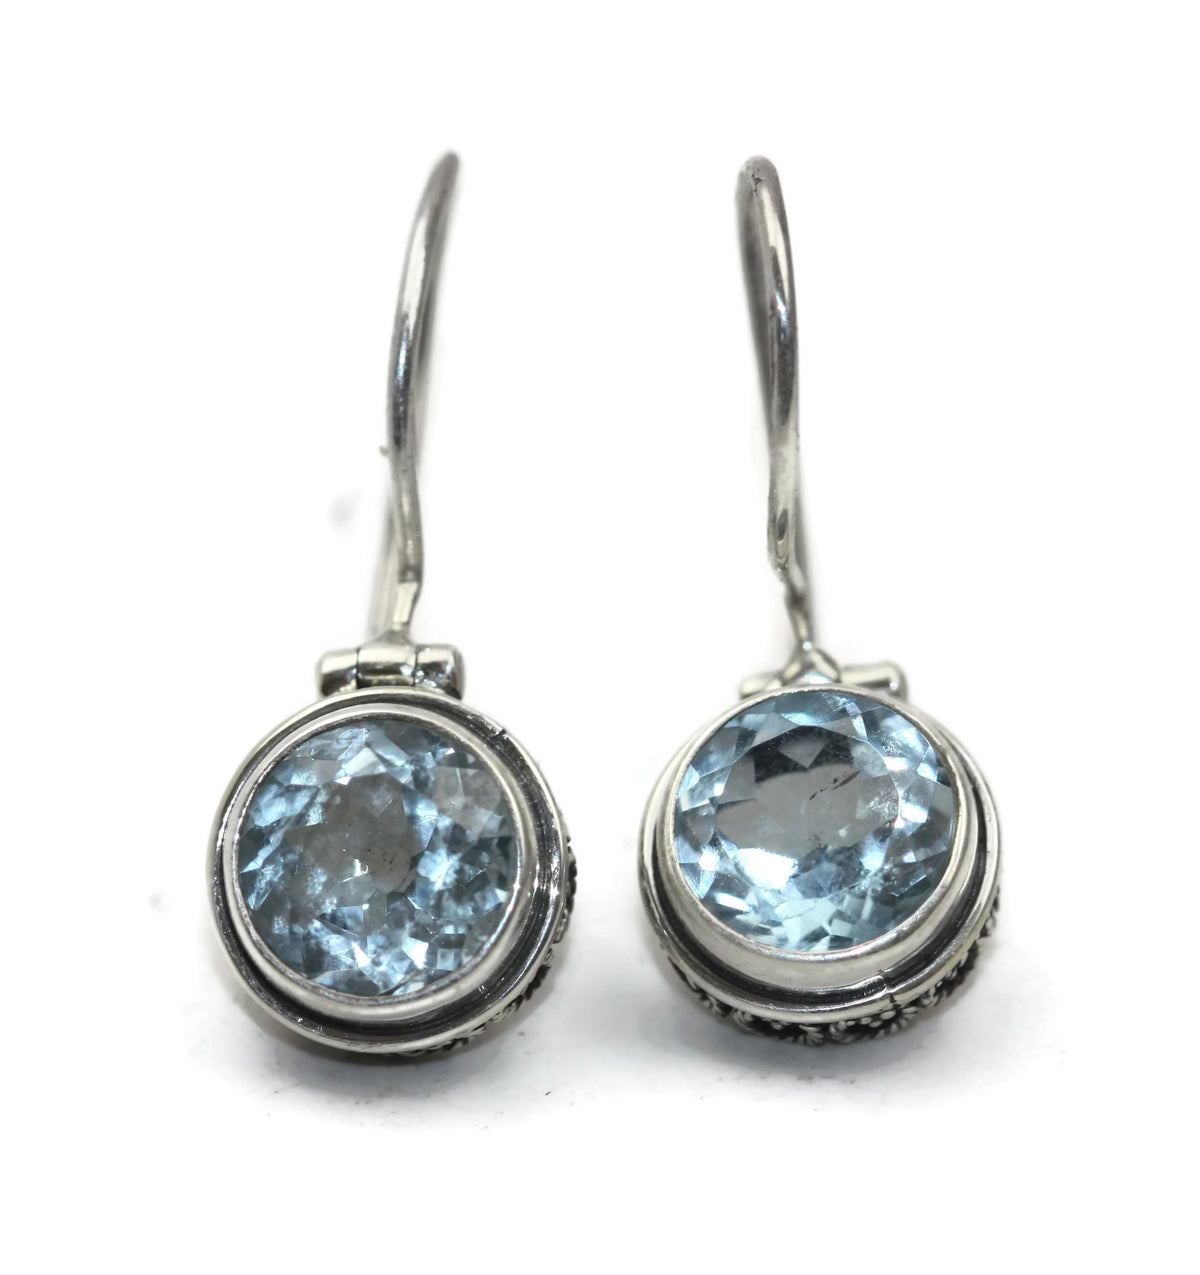 Handmade 925 Sterling Silver Faceted Topaz Round With Heart Filigree Earrings